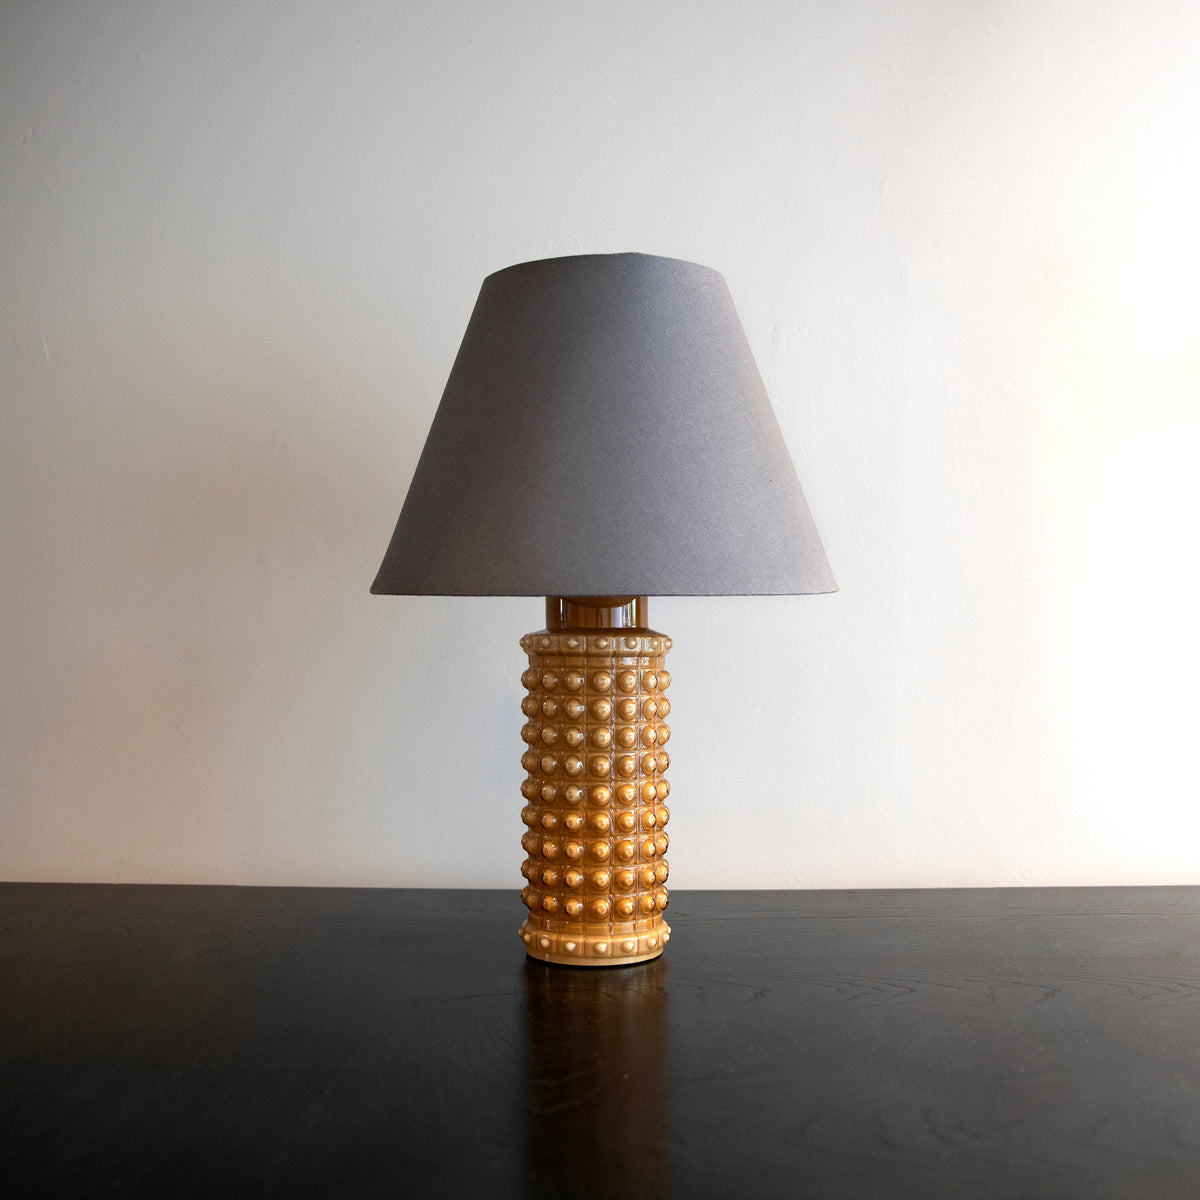 Textured Glass Lamp / Helena Tynell, 1968